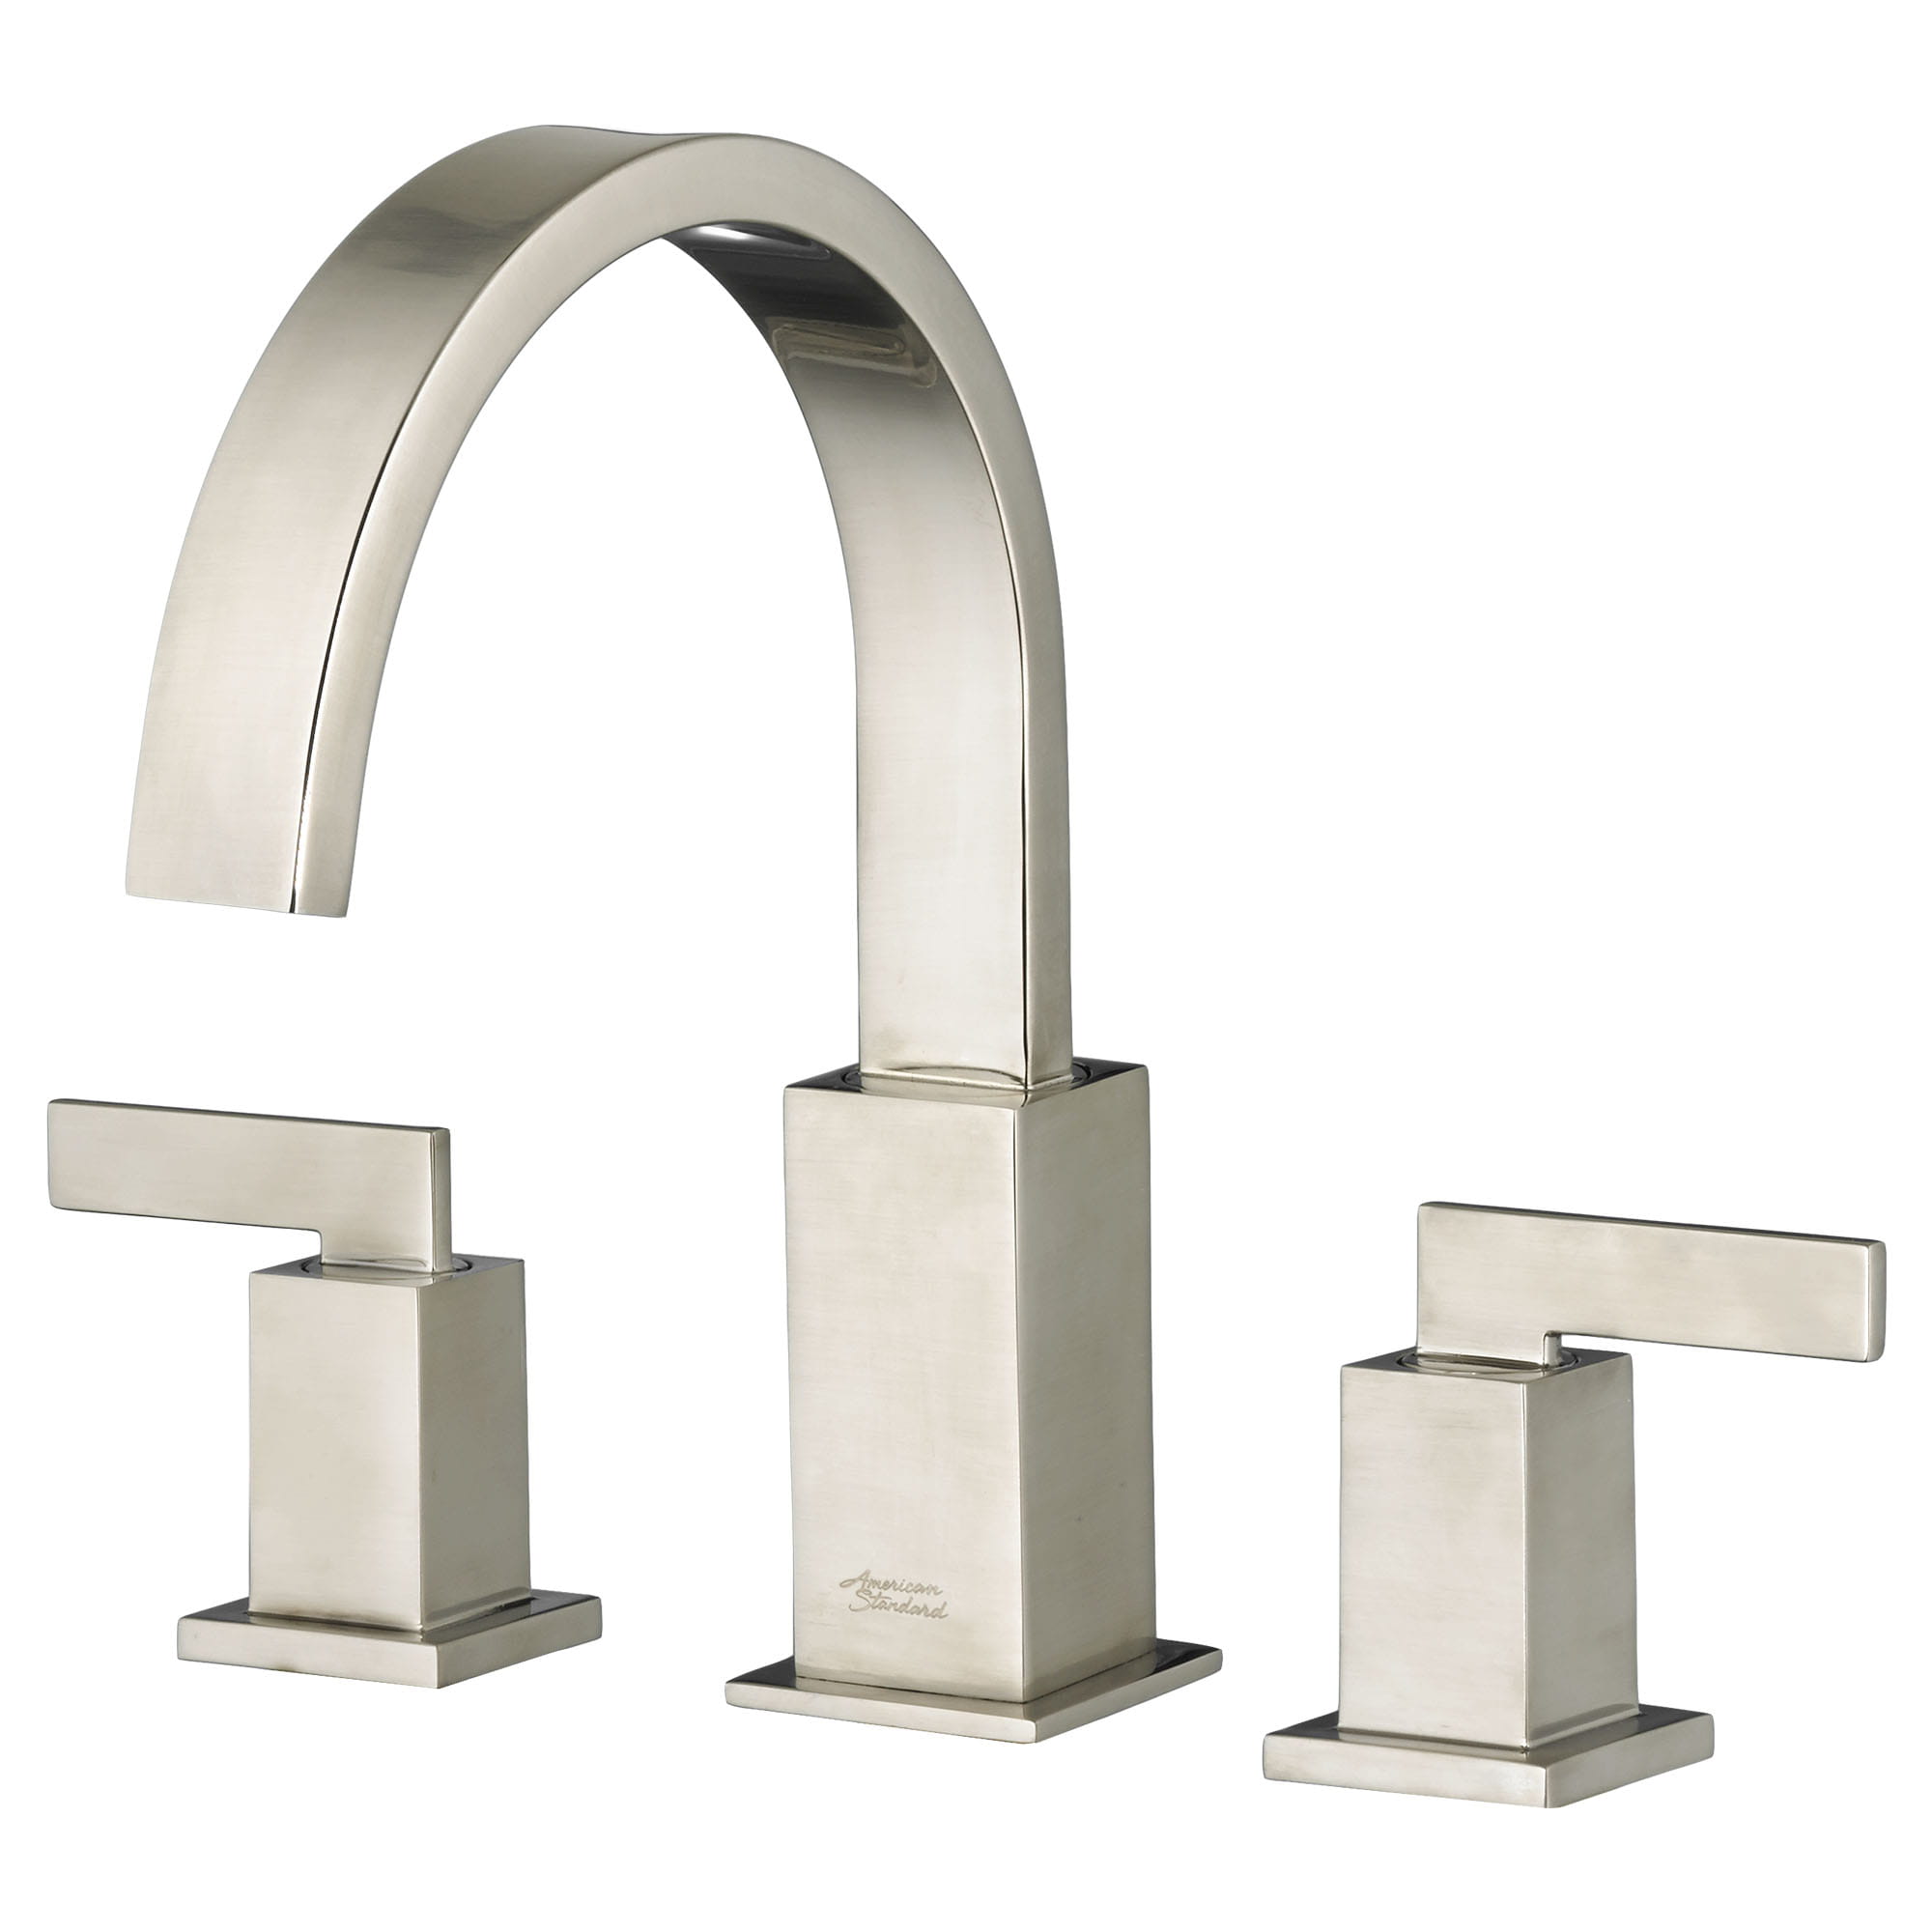 Time Square® Bathtub Faucet With Lever Handles for Flash® Rough-In Valve